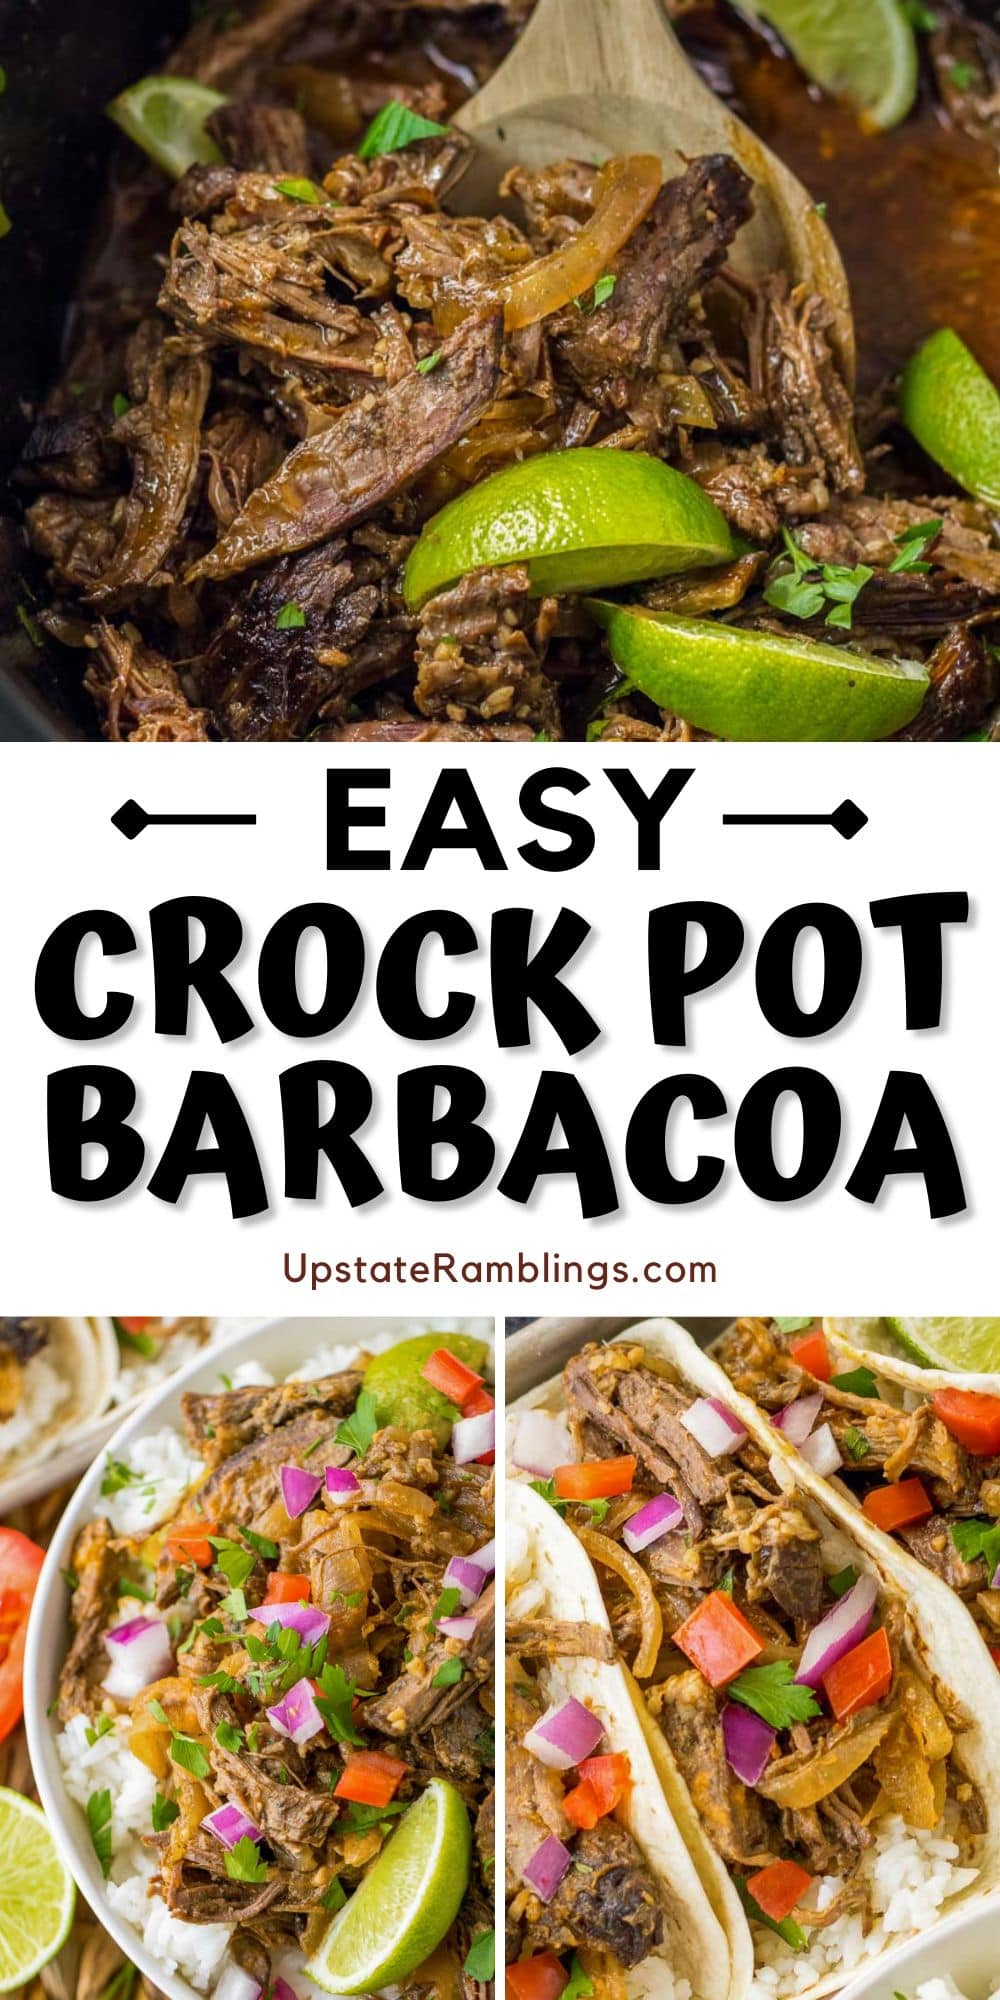 Slow Cooker Barbacoa is Perfect For Taco Tuesday - Upstate Ramblings